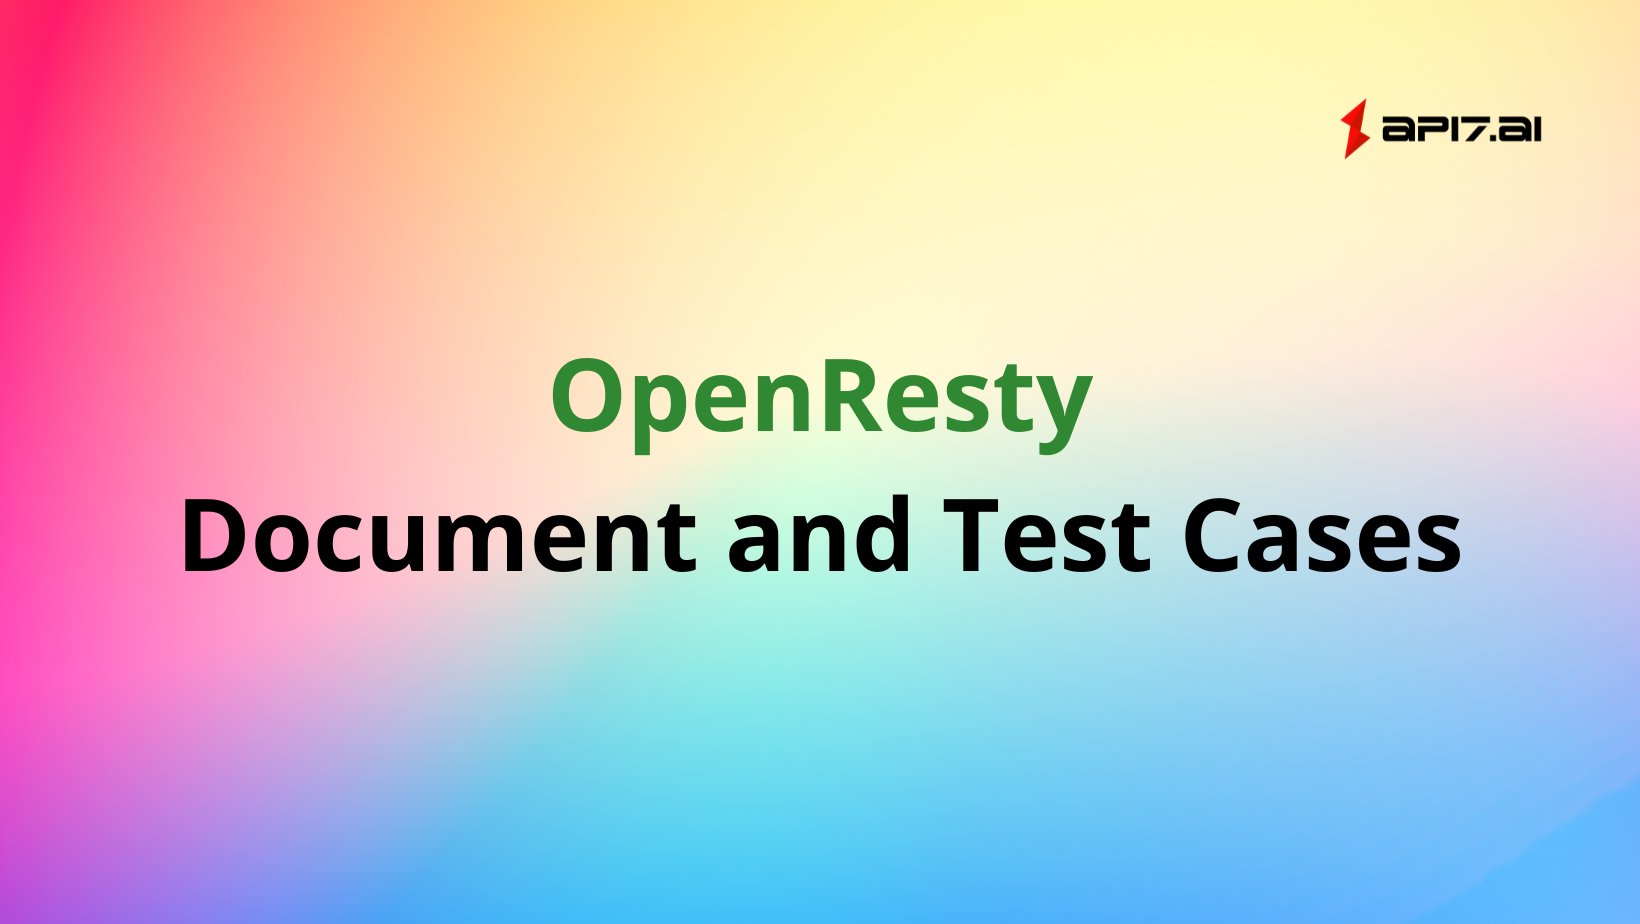 Documentation and Test Cases: Powerful Tools for Solving OpenResty Development Problems